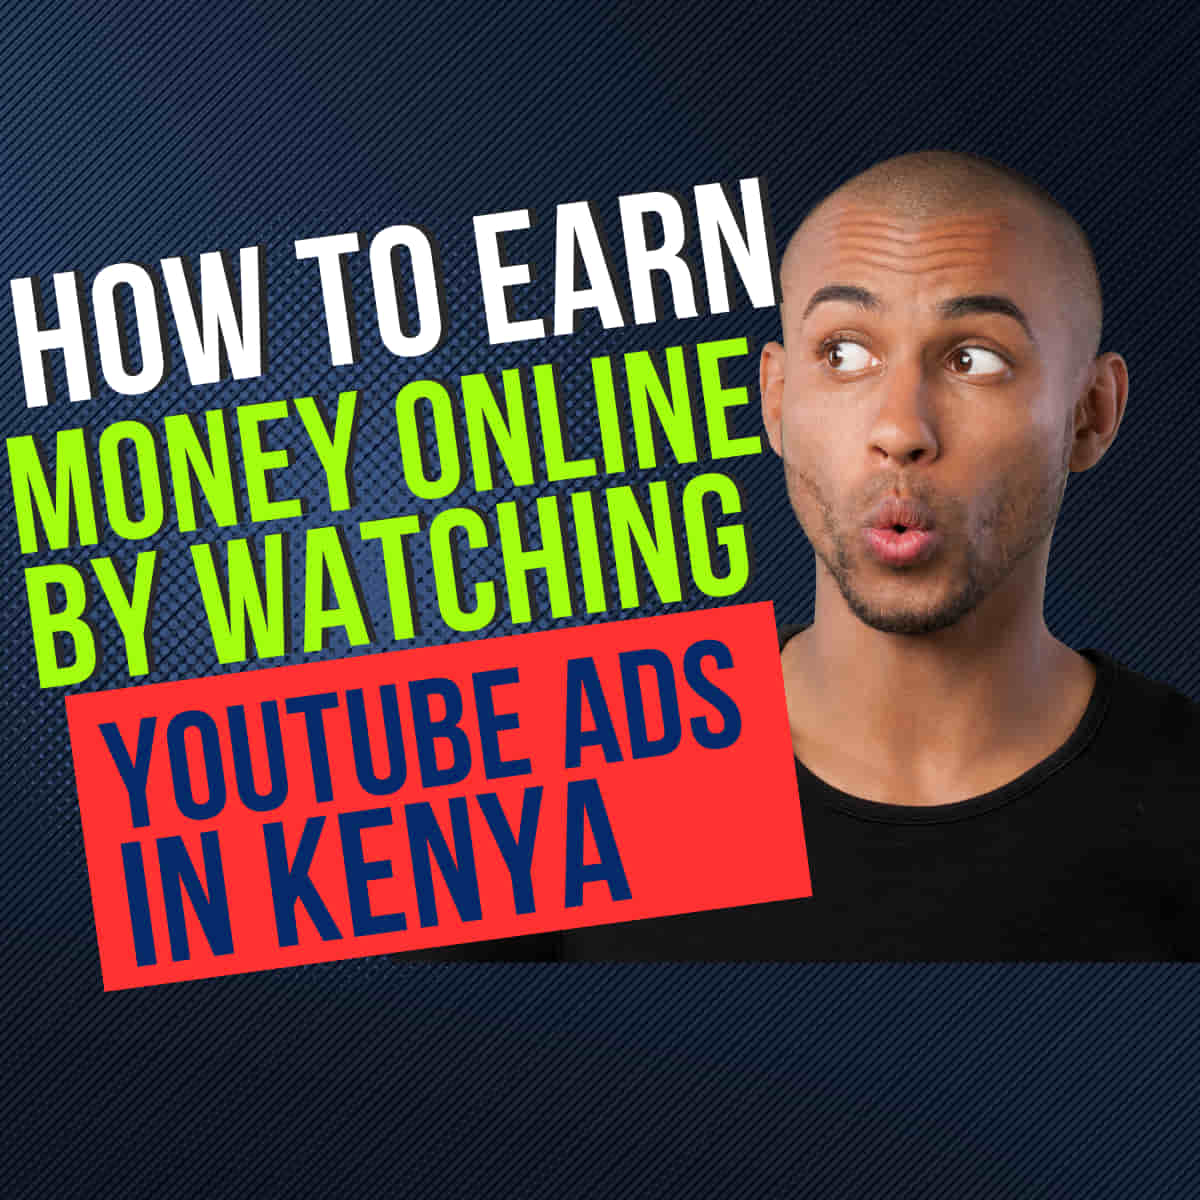 how to earn money by watching ads on youtube in kenya